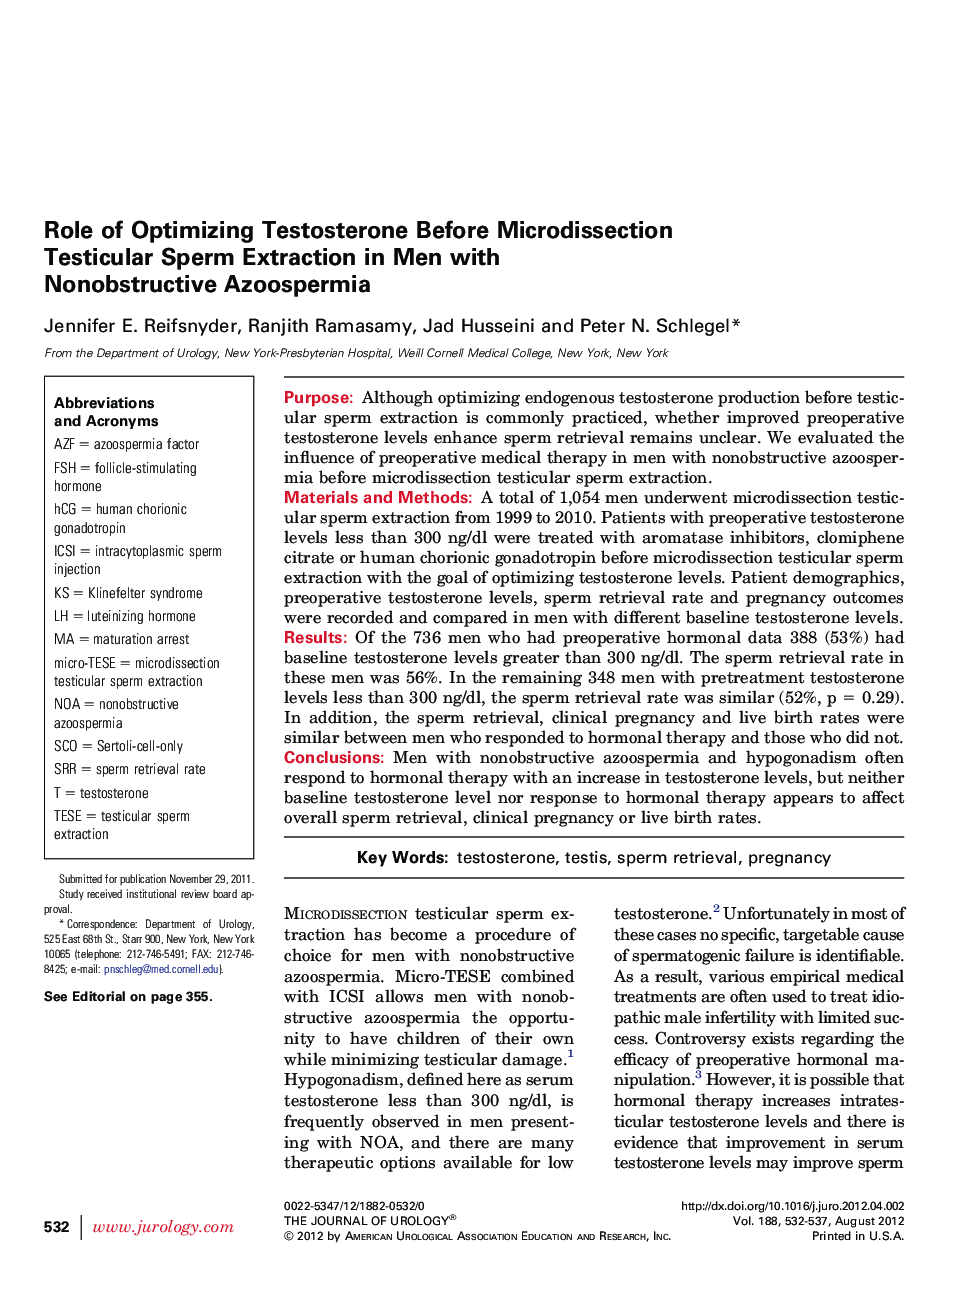 Role of Optimizing Testosterone Before Microdissection Testicular Sperm Extraction in Men with Nonobstructive Azoospermia 